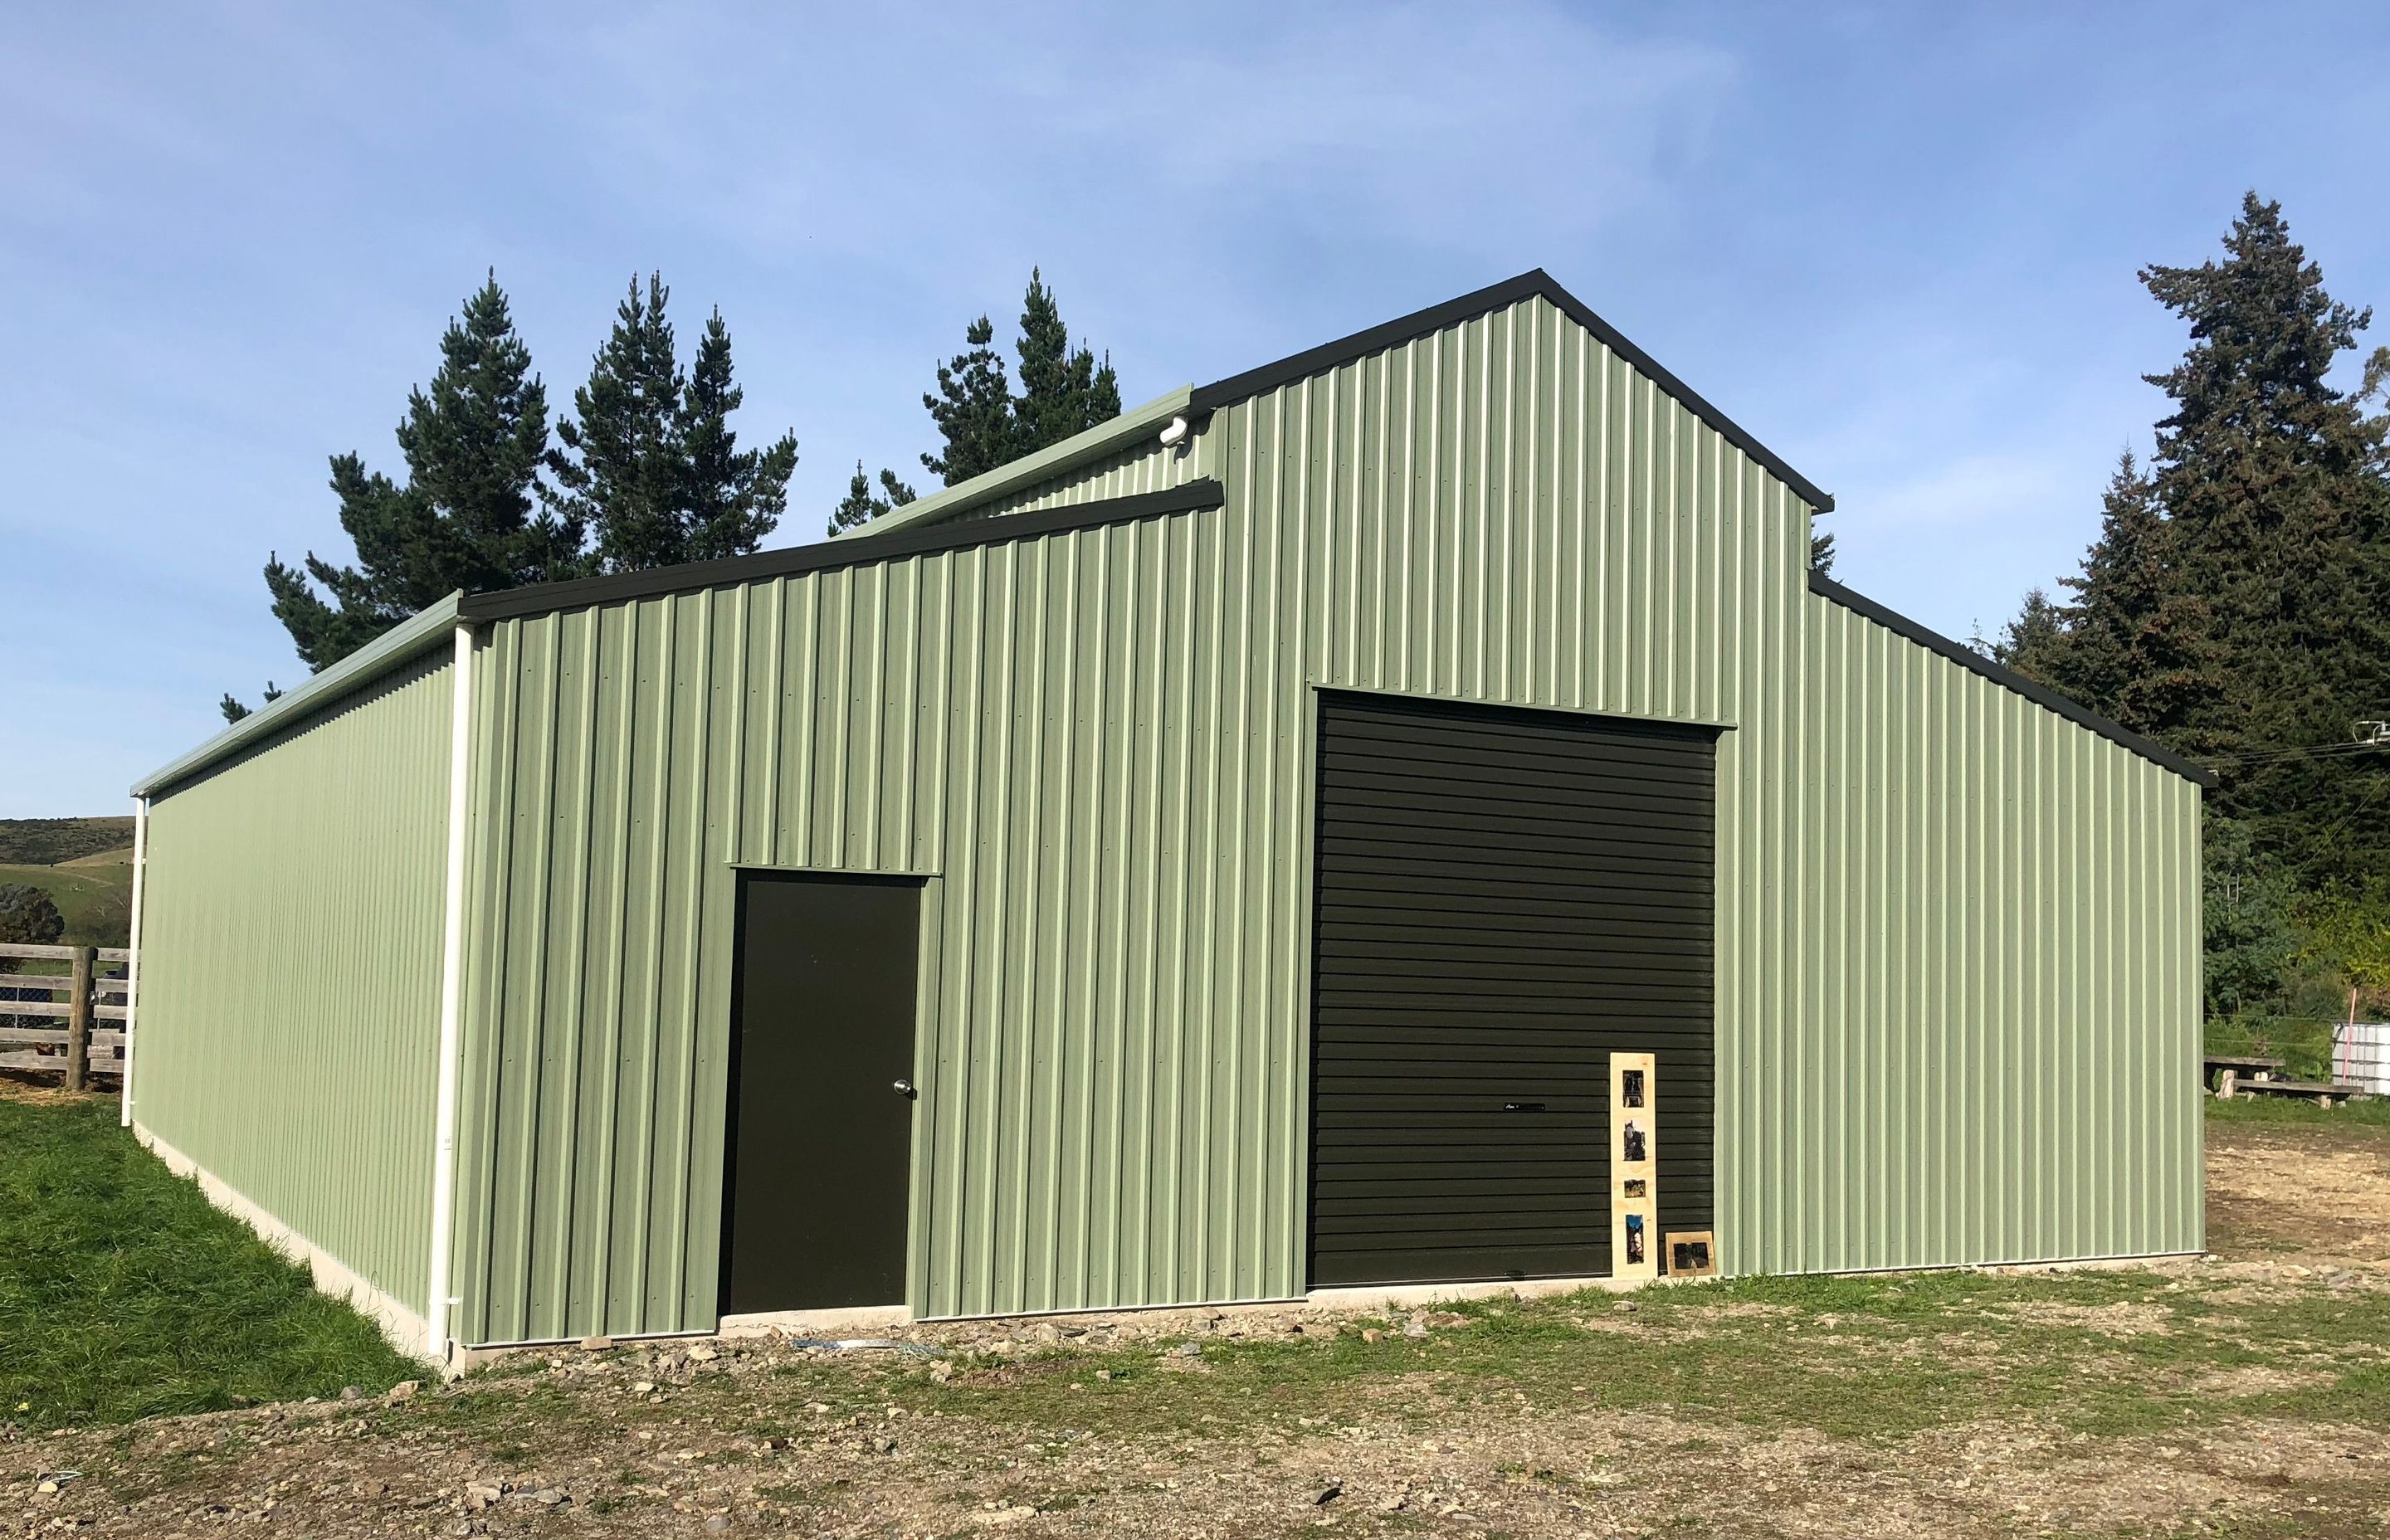 Completion of a heritage barn build in the rural Otago town of Dunback.